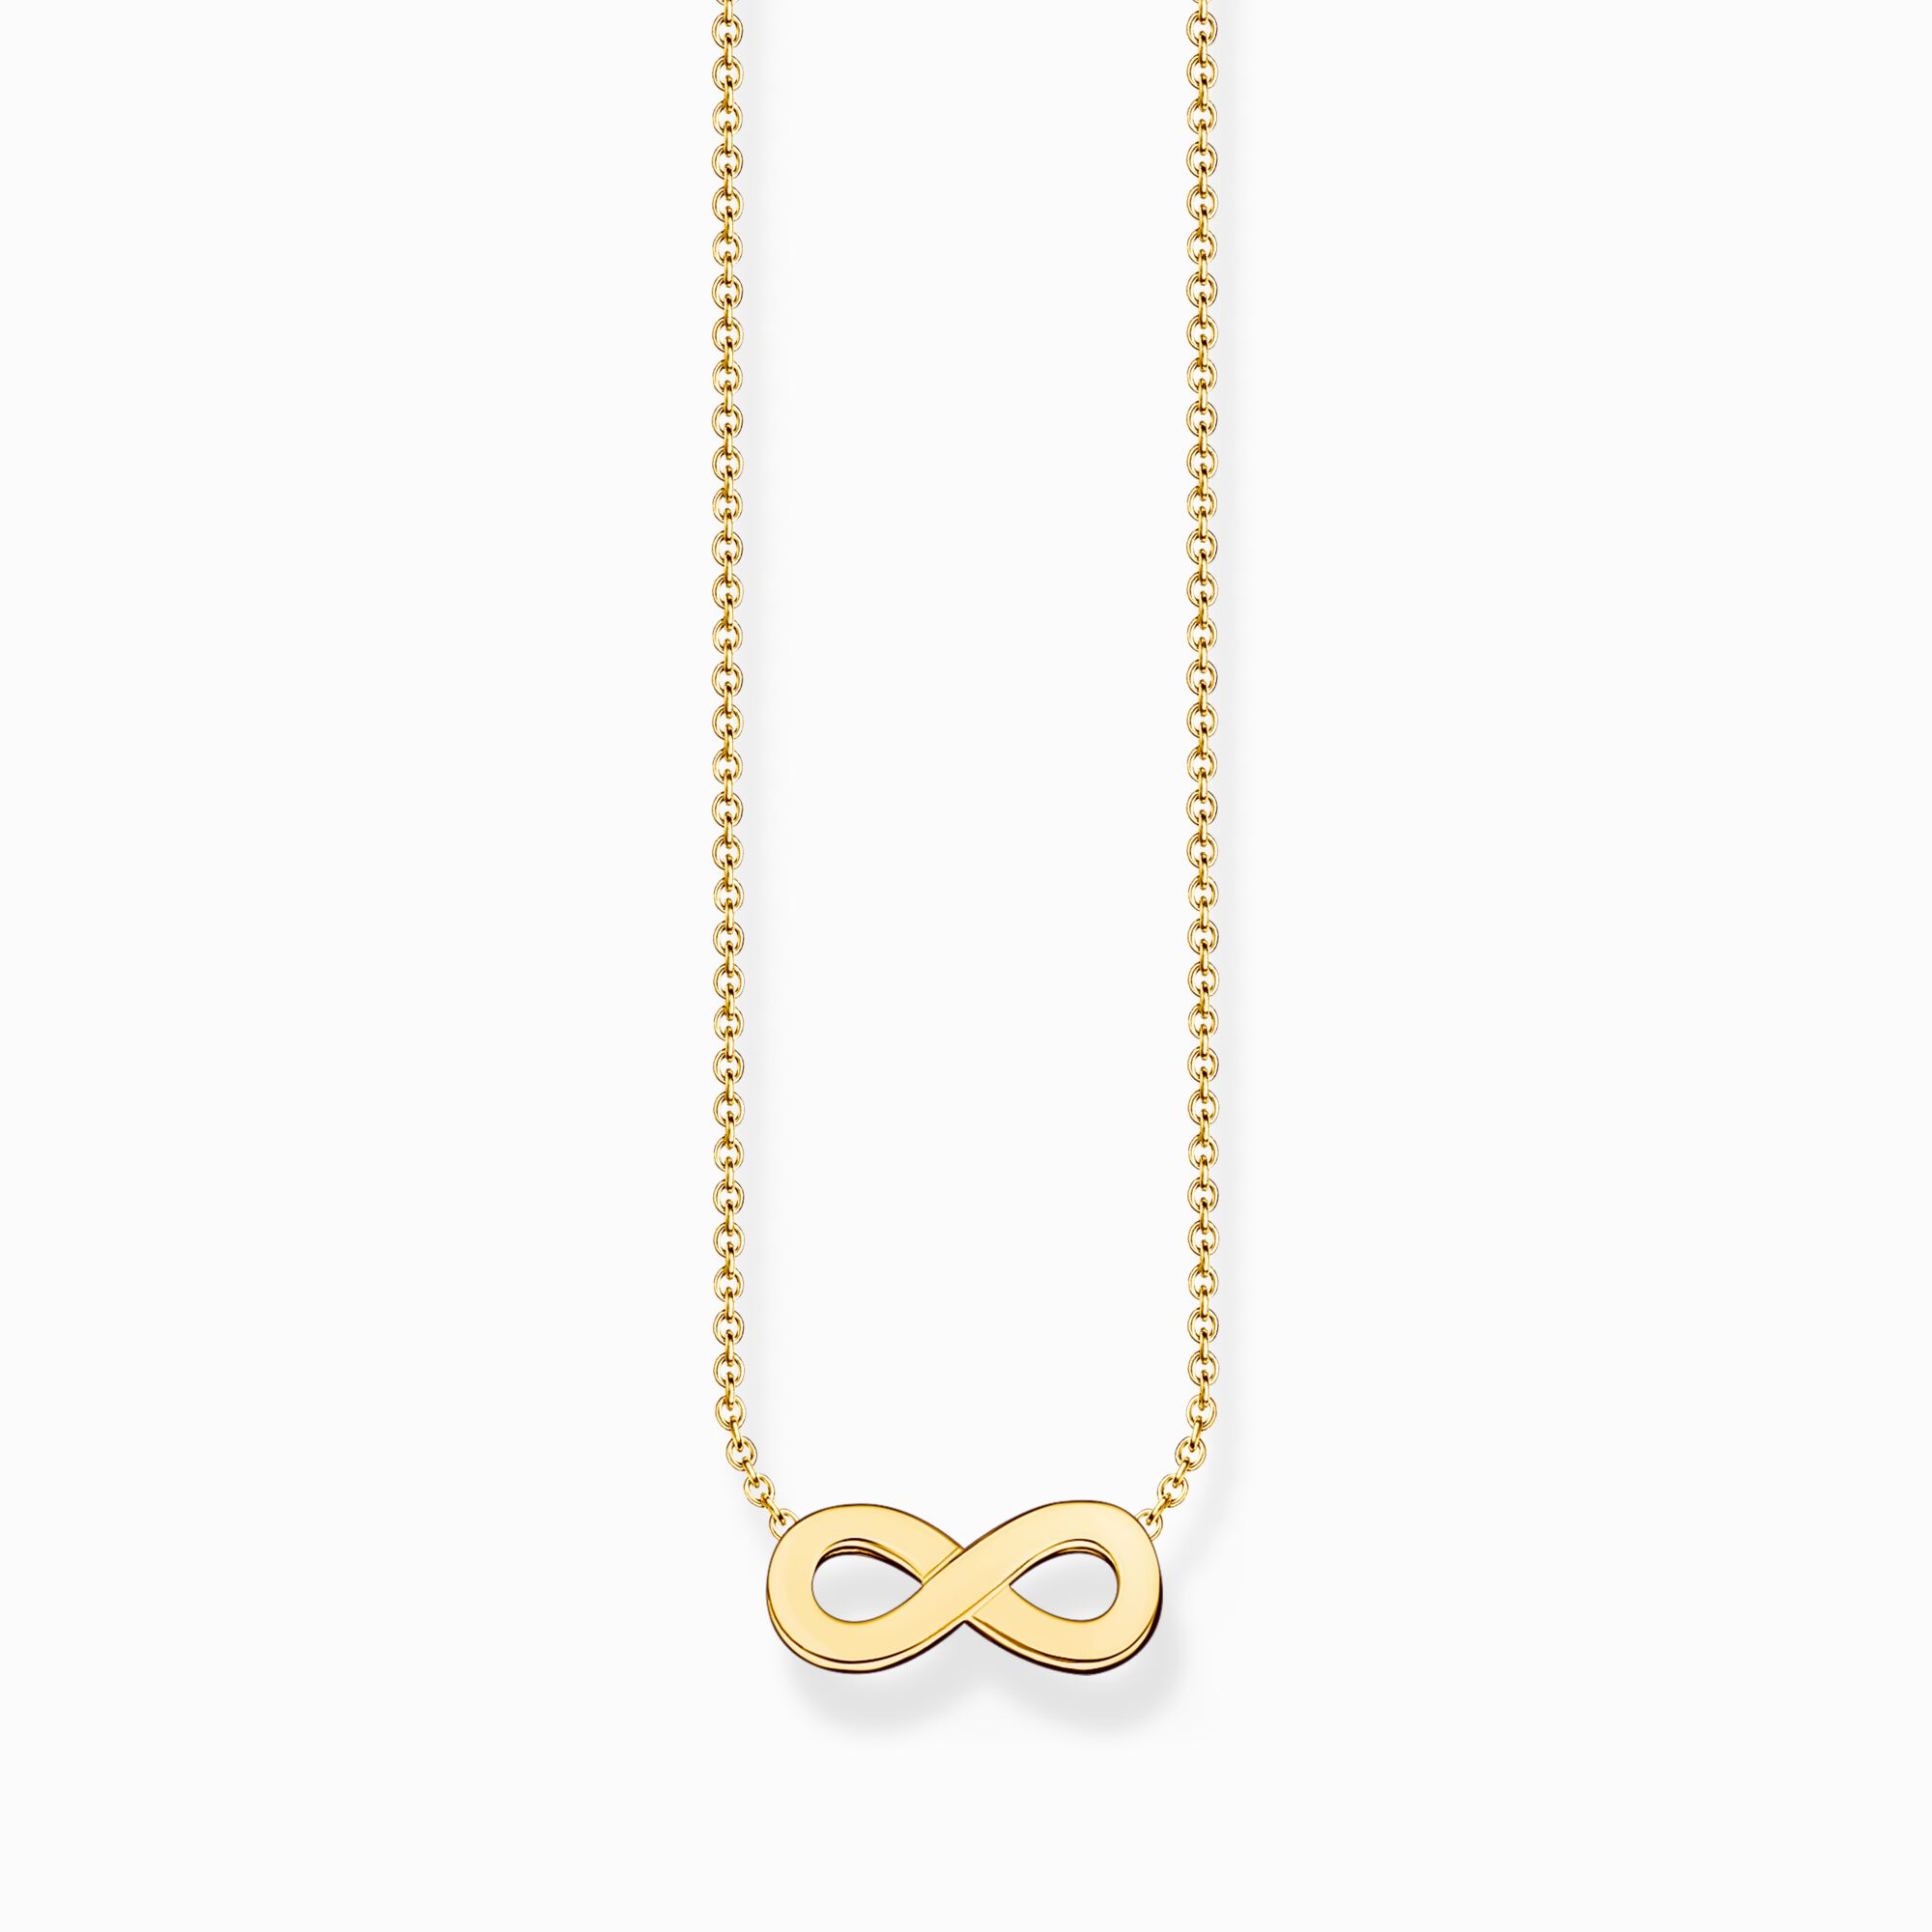 Gold-plated necklace with infinity pendant from the Charming Collection collection in the THOMAS SABO online store